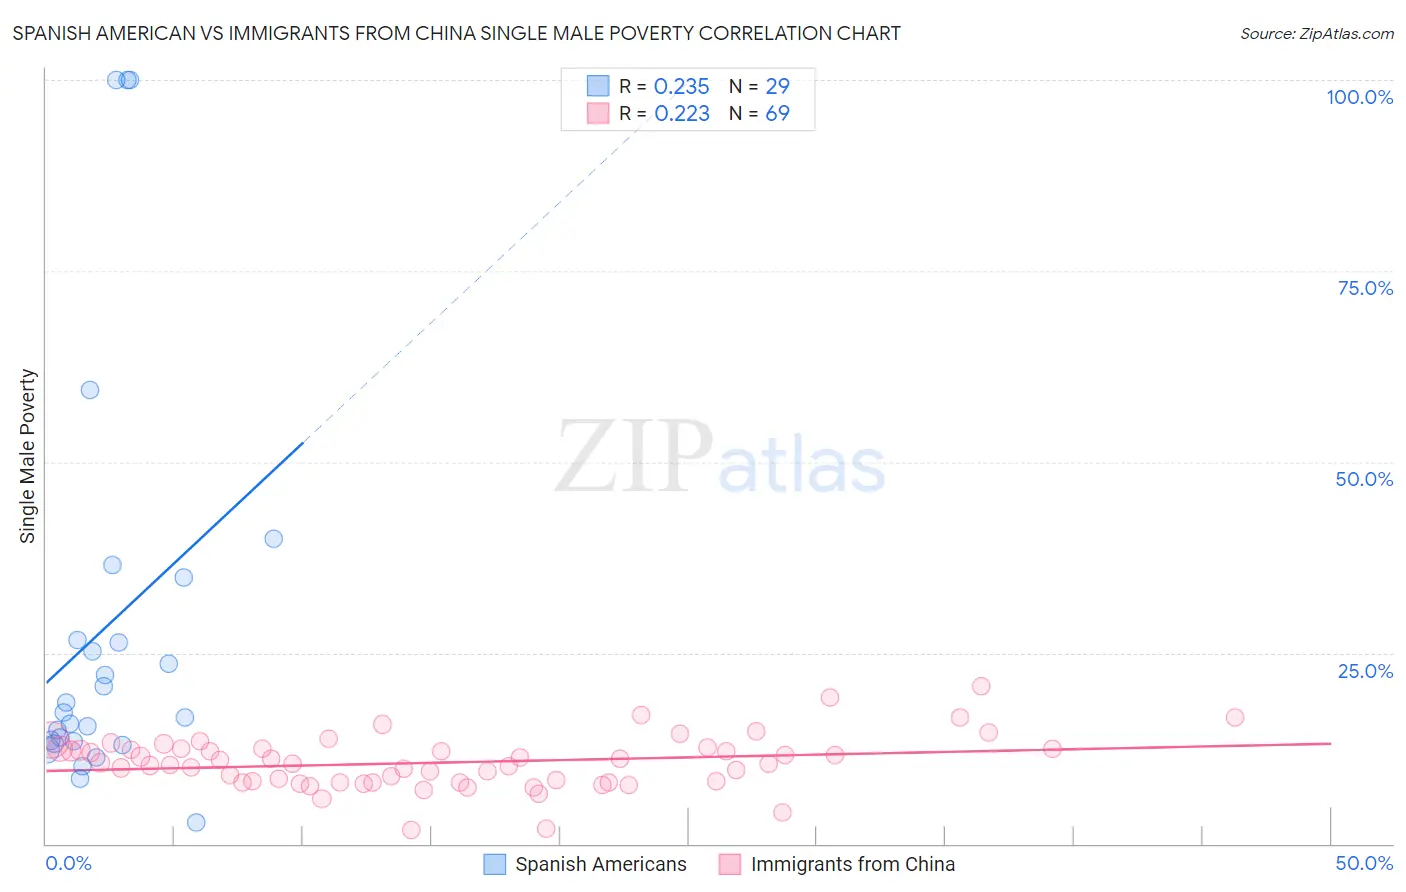 Spanish American vs Immigrants from China Single Male Poverty